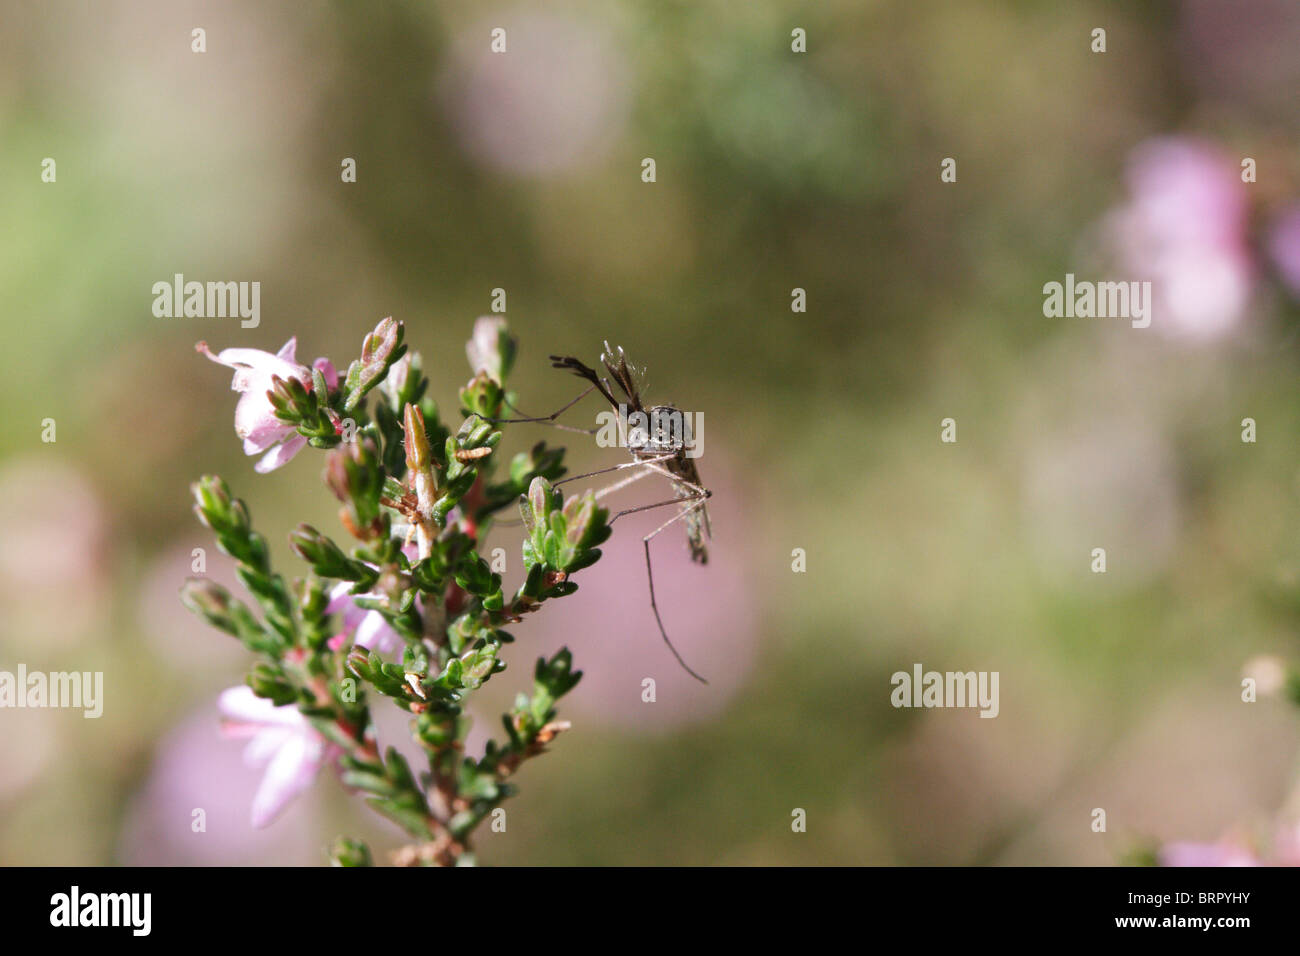 Culiseta annulata, a mosquito, on heath. This is a male Stock Photo